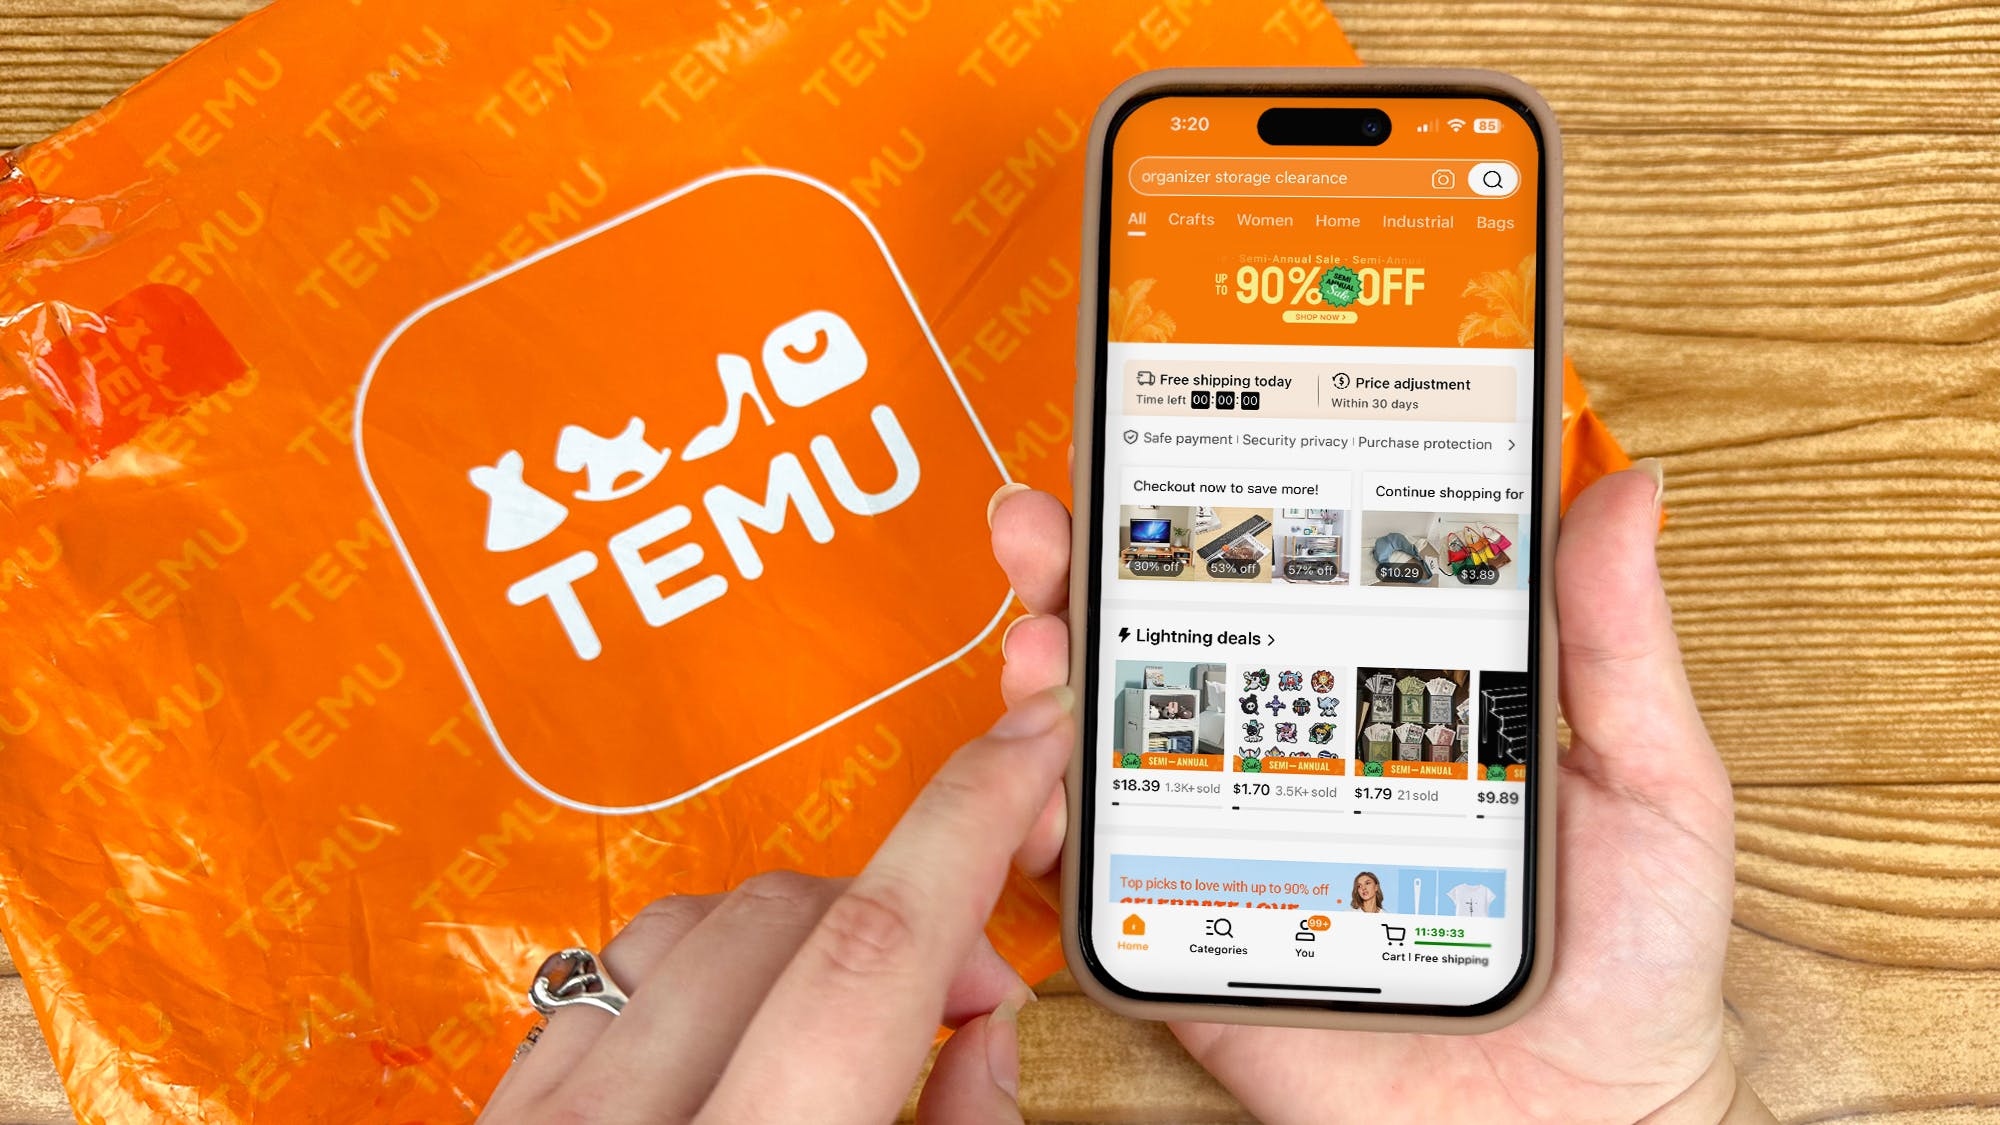 What Is Temu and Is It Legit? - Dropshipping From China